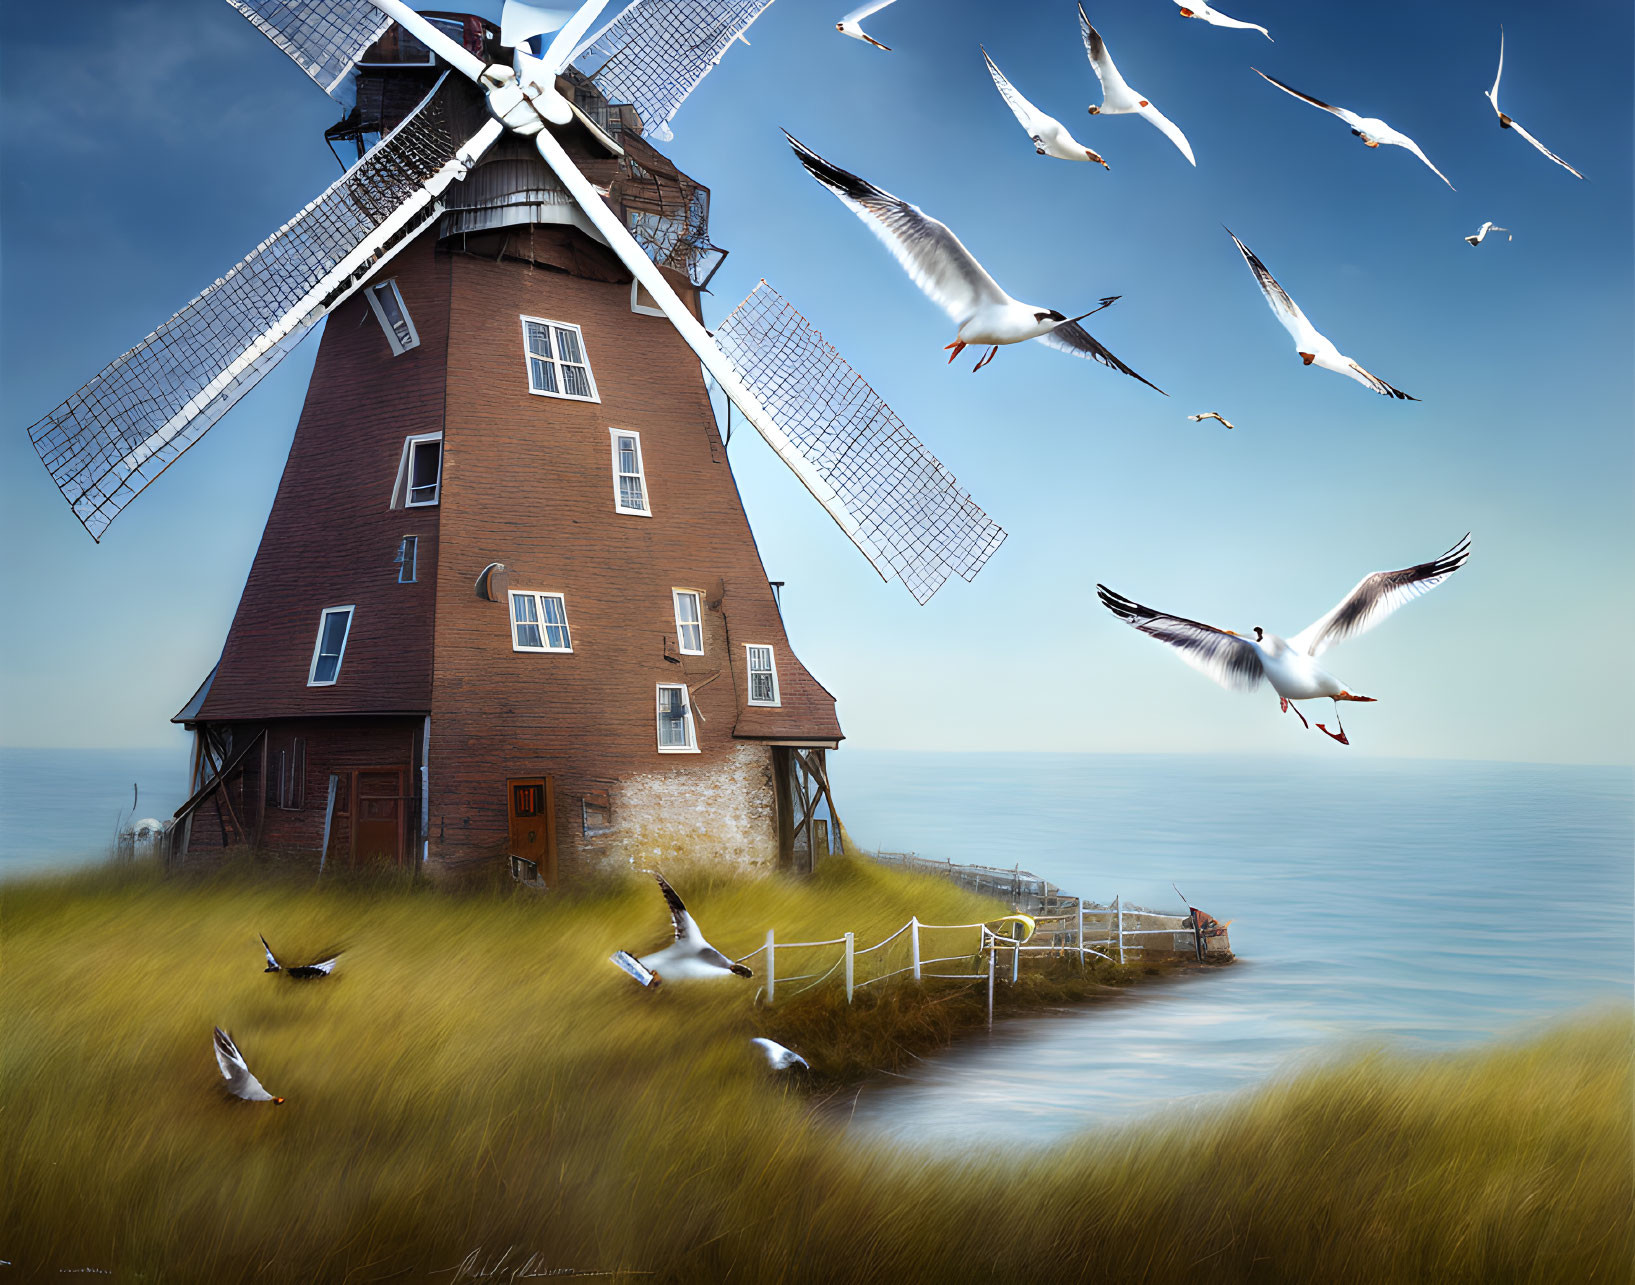 Windmill on Grass Cliff with Flying Seagulls in Blue Sky